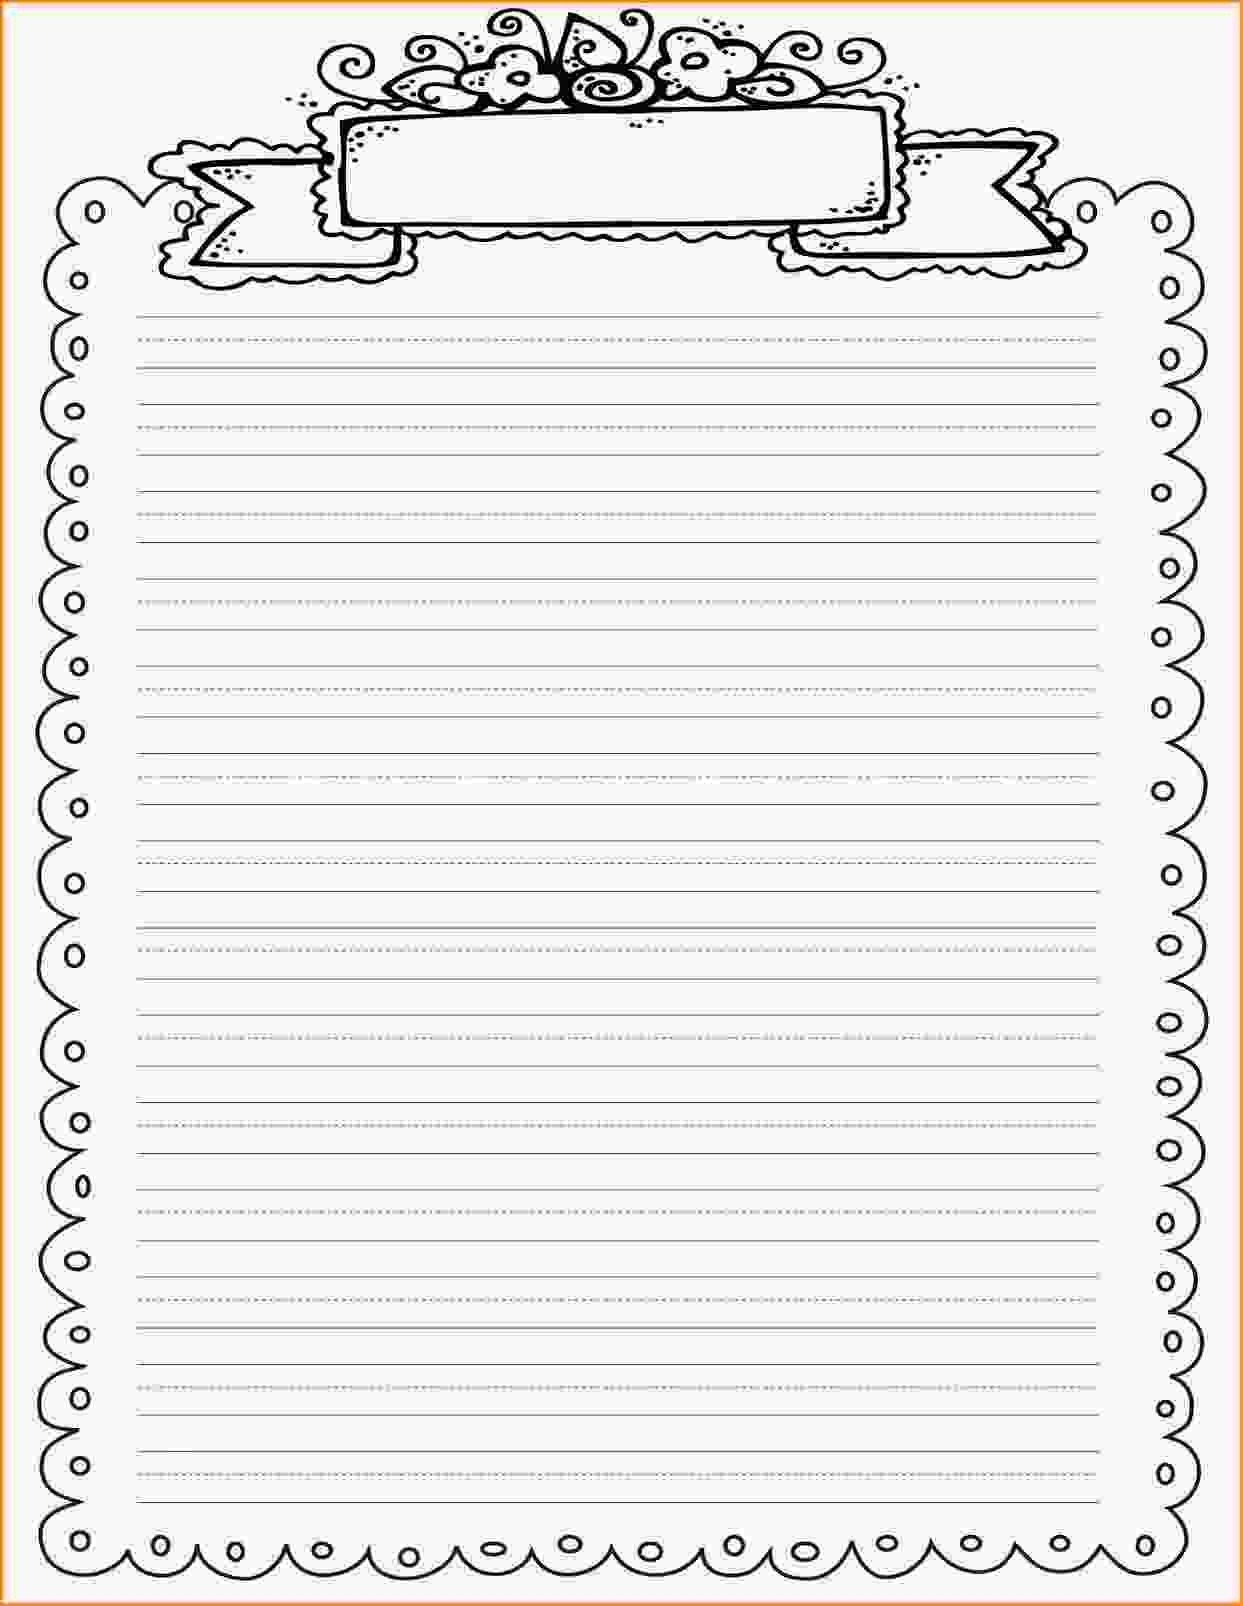 Printable Lined Paper With Border | Writings and Essays Corner